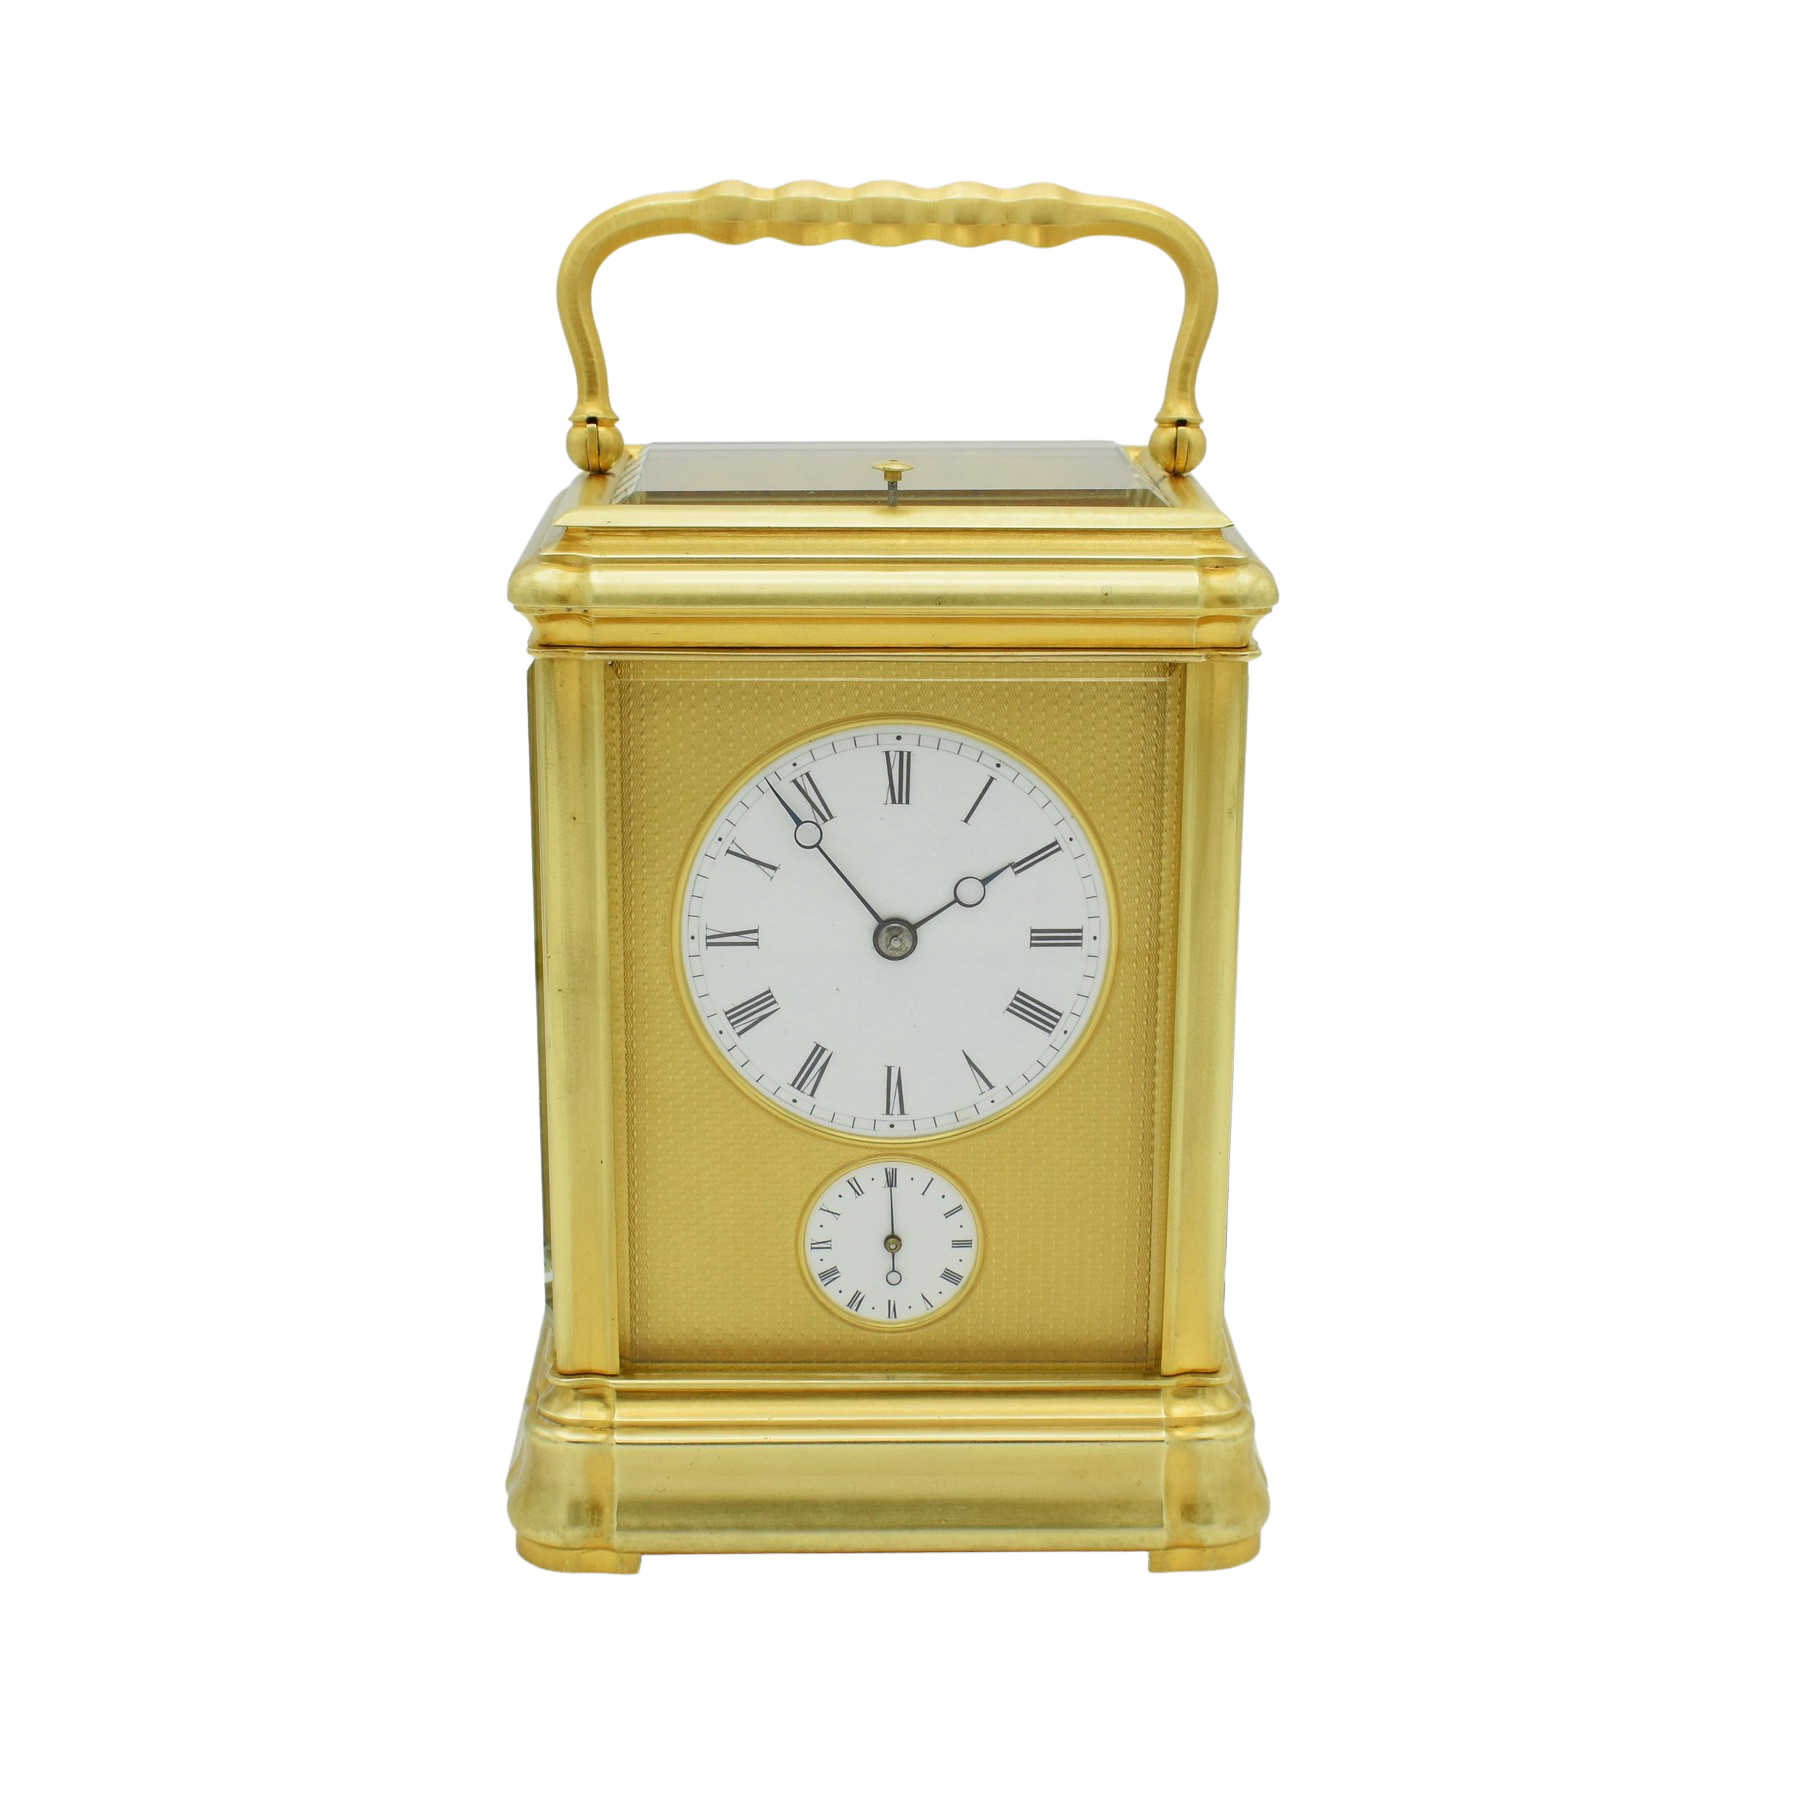 Fine Carriage Clock – It's About Time